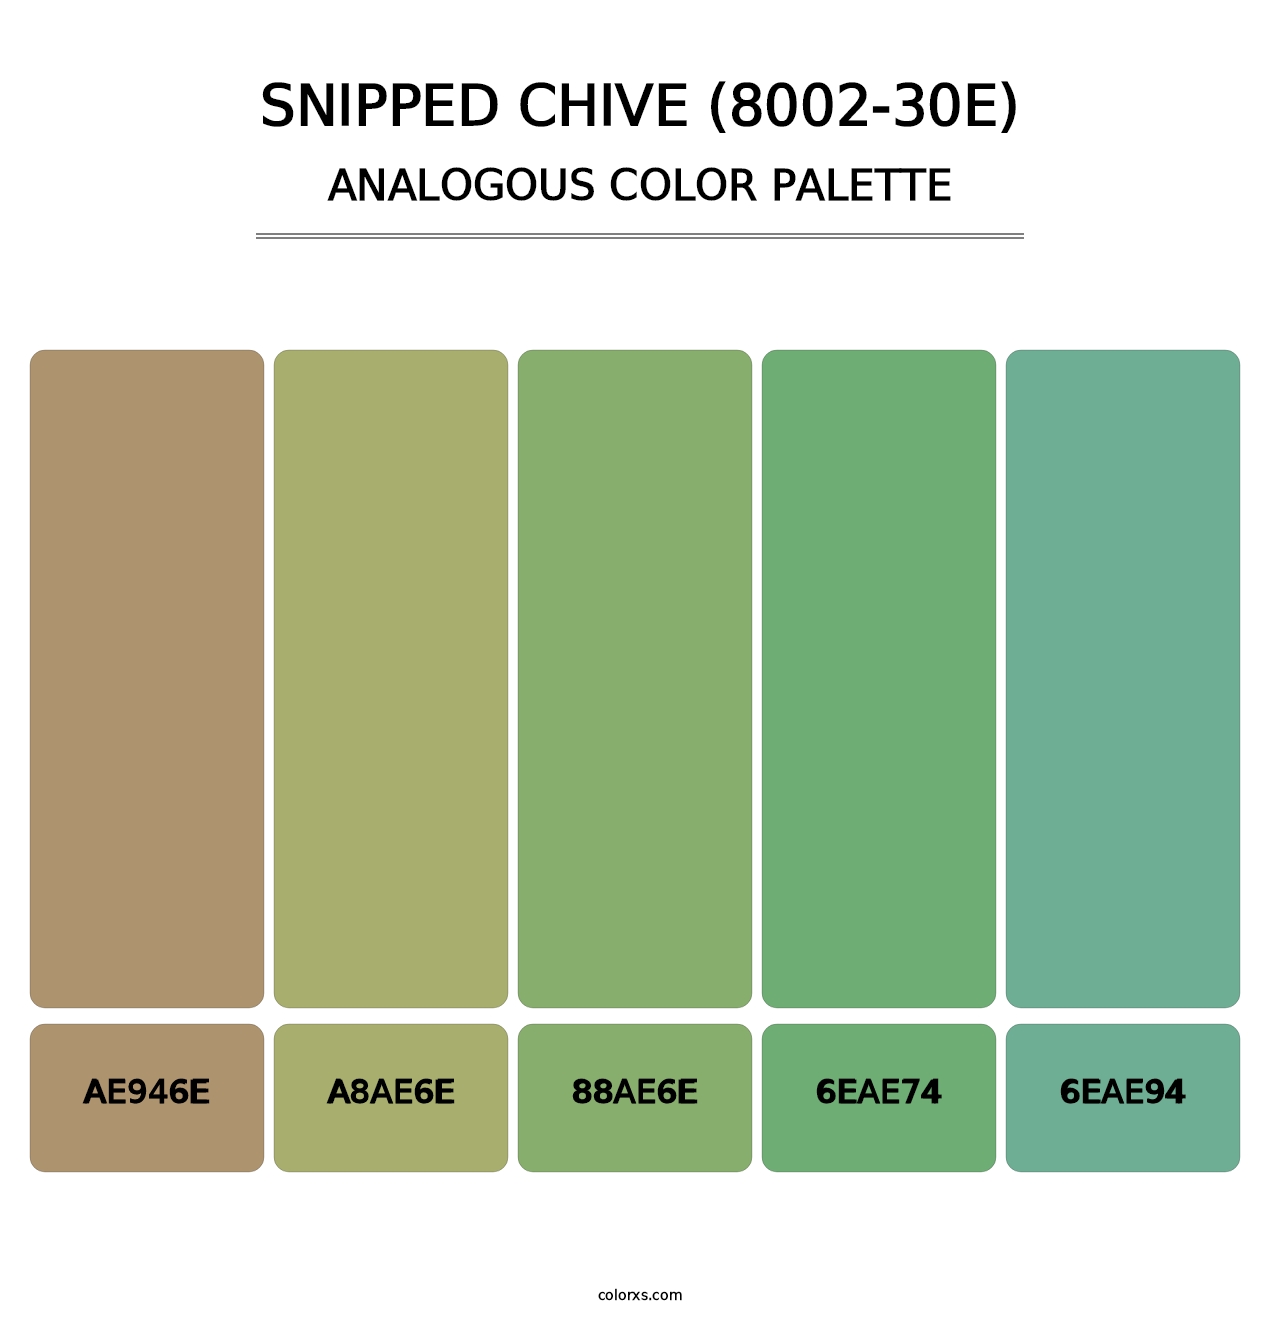 Snipped Chive (8002-30E) - Analogous Color Palette